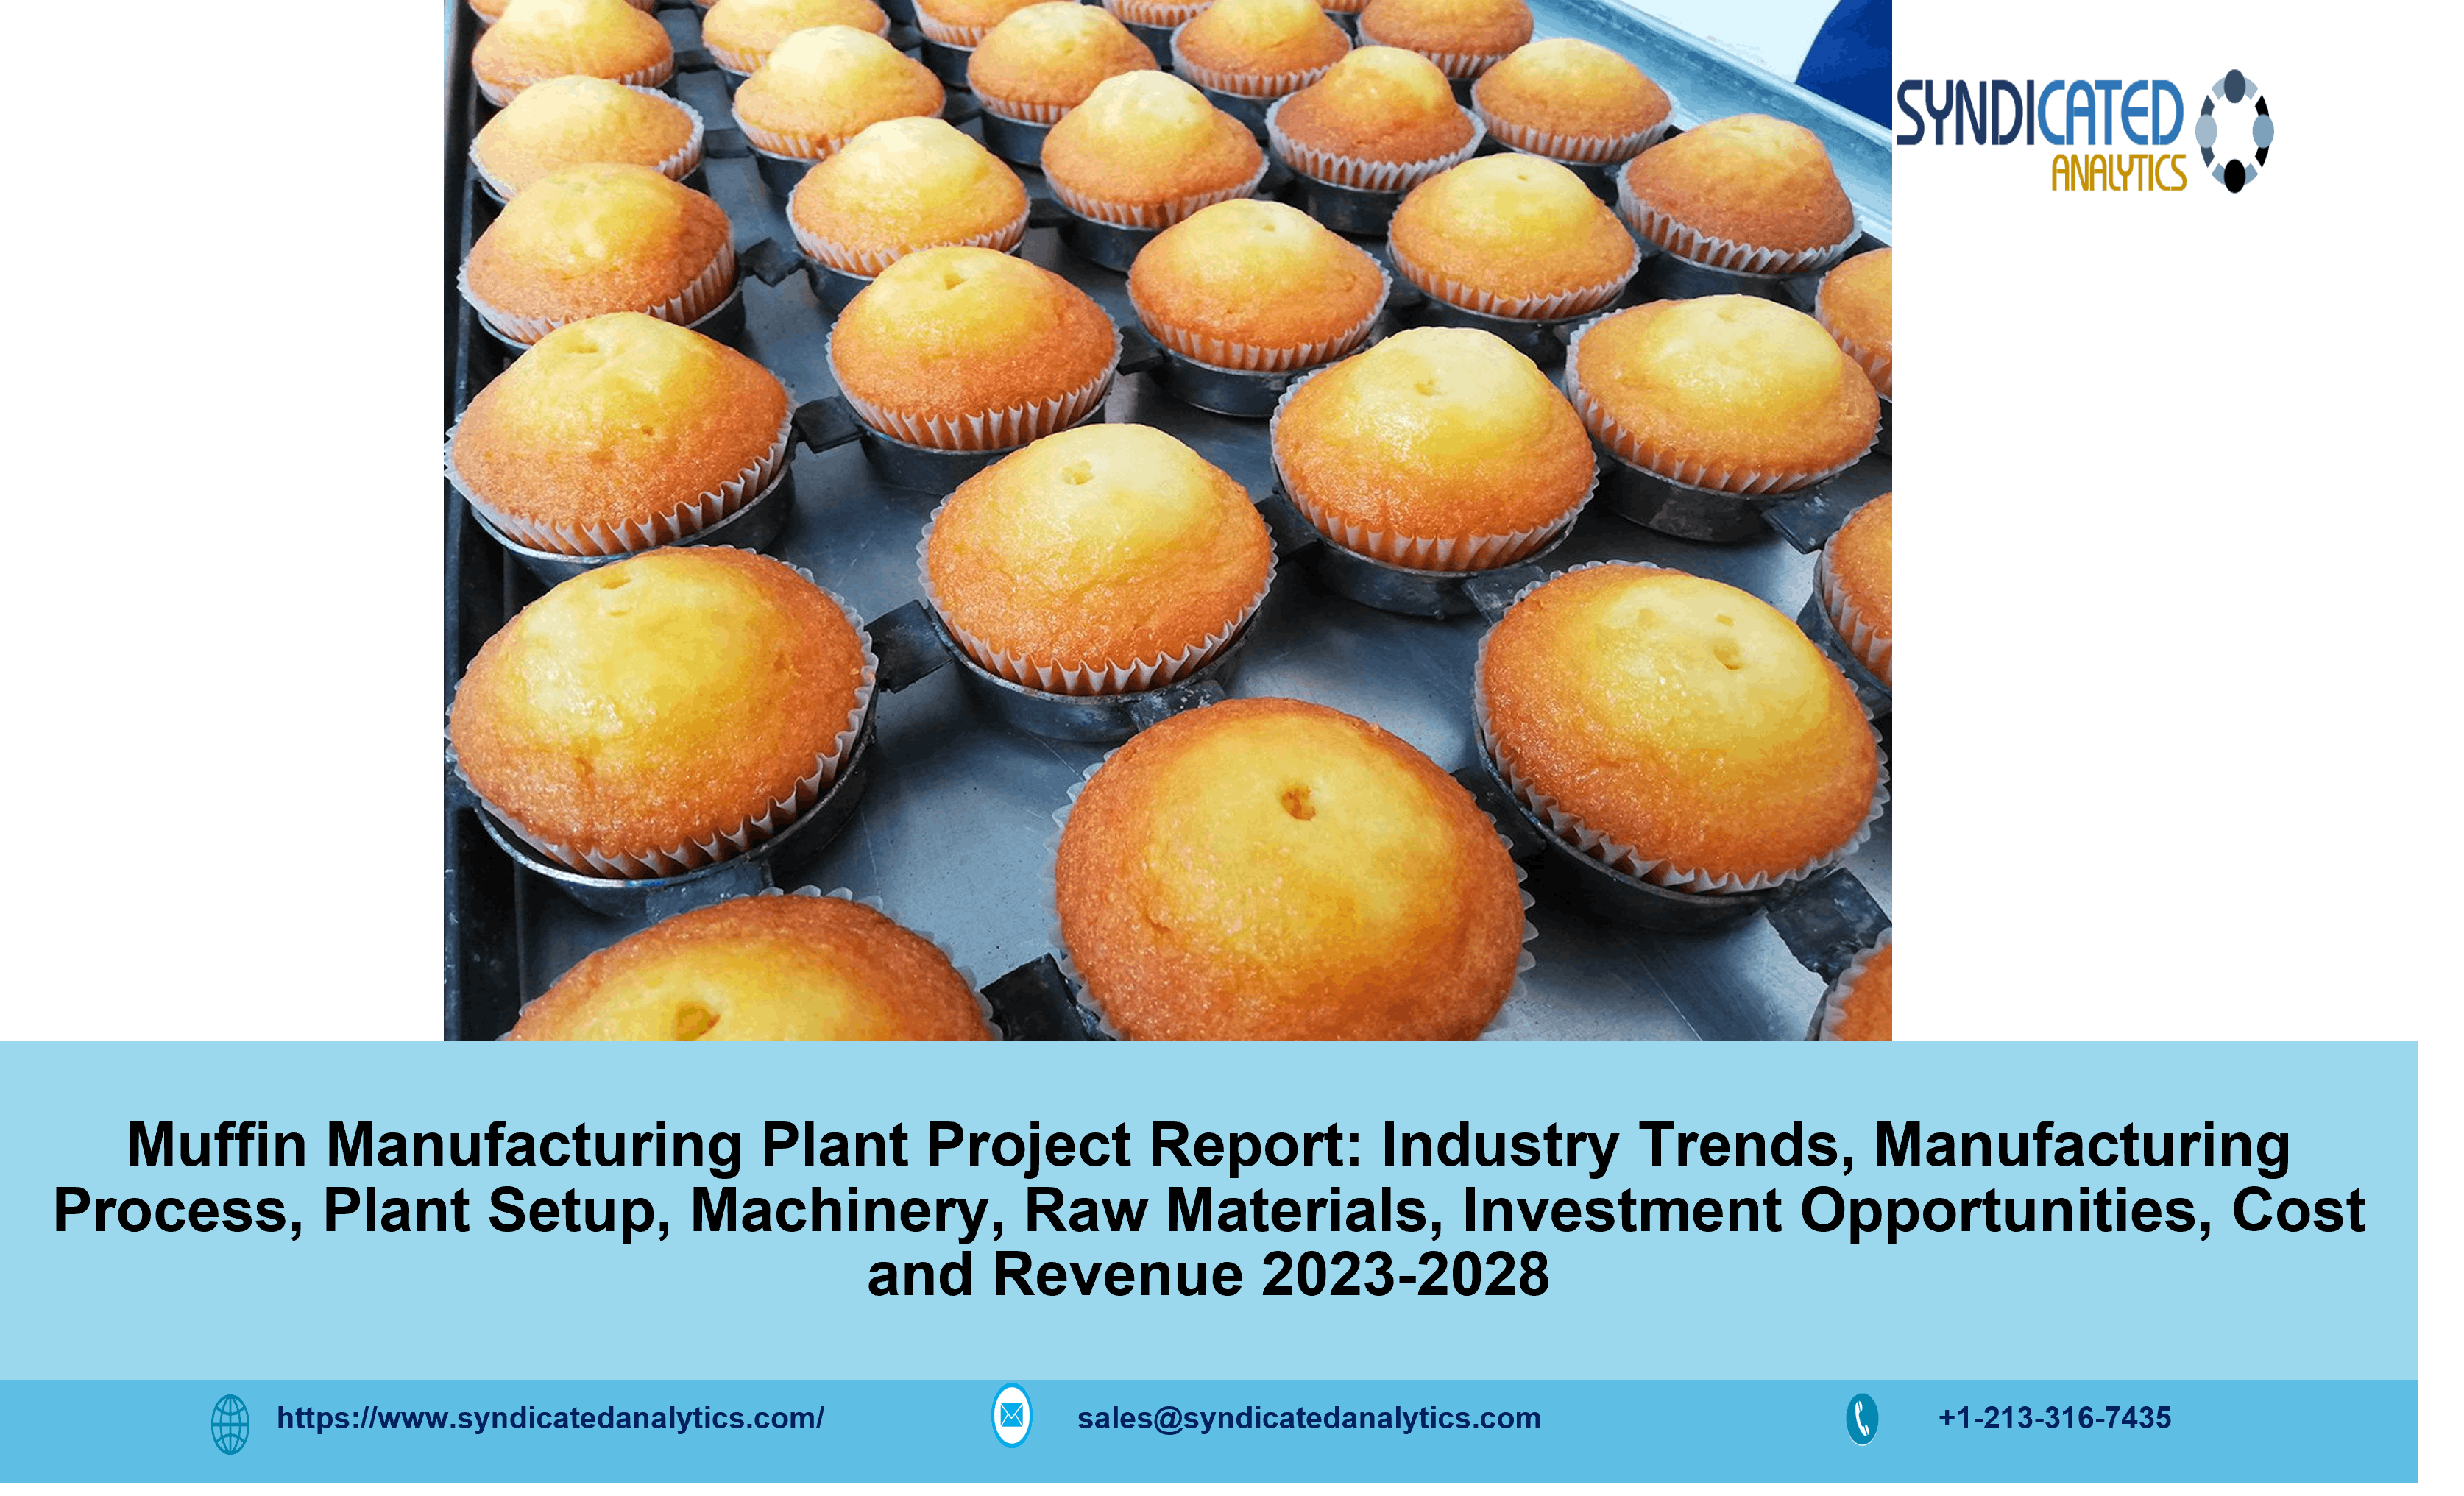 Muffin Manufacturing Plant Project Report.png